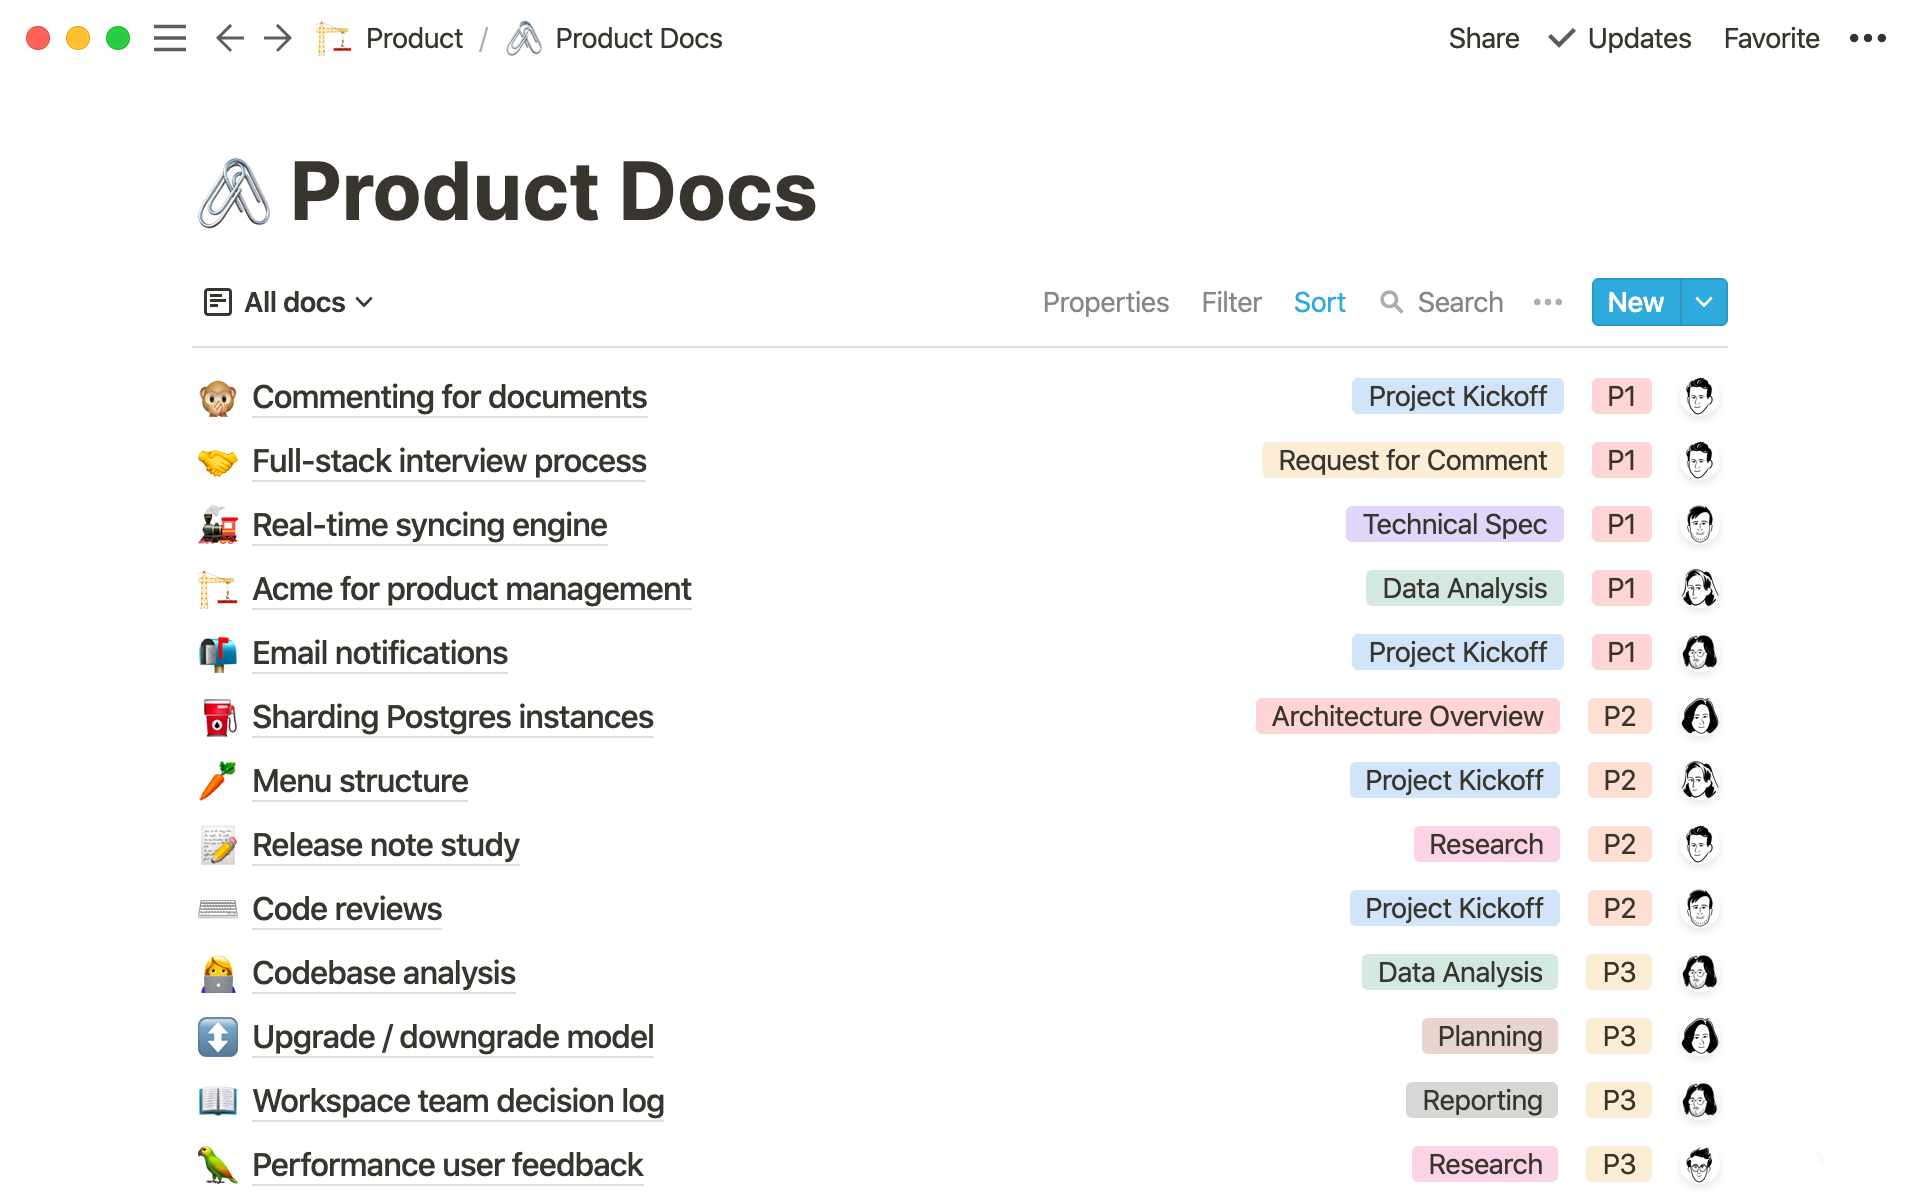 Never miss anything with all your product team’s documentation in one place.